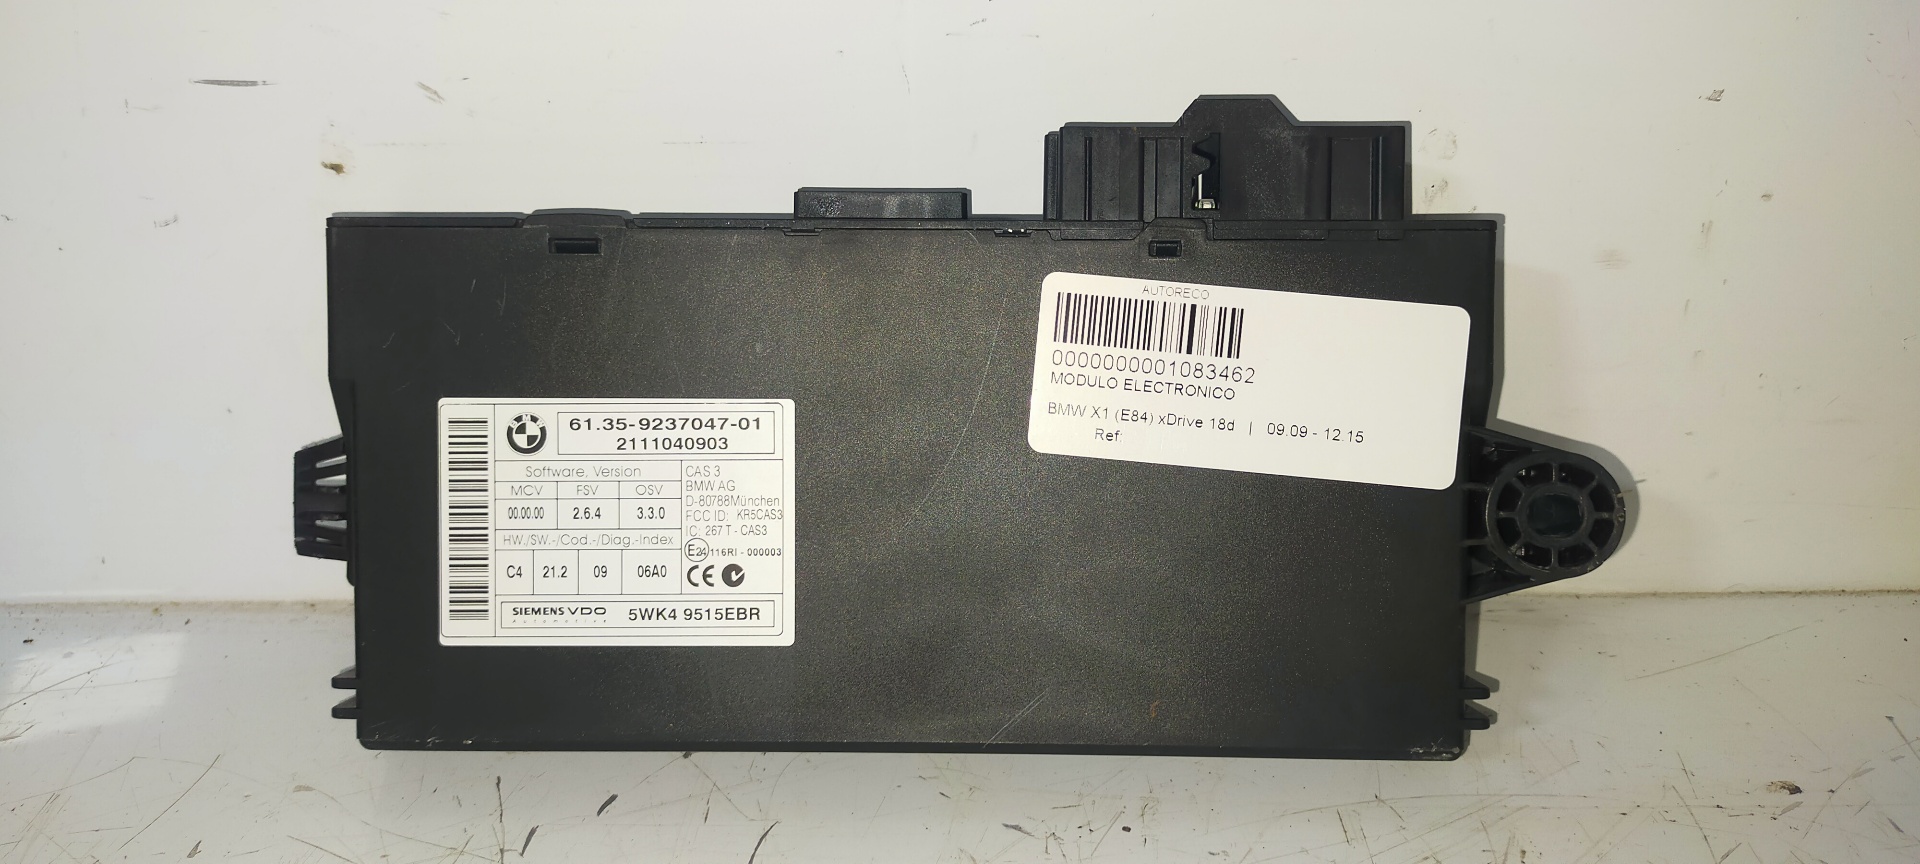 BMW X1 E84 (2009-2015) Other Control Units 61359237047, 61359237047-01, 2111040903 23041599